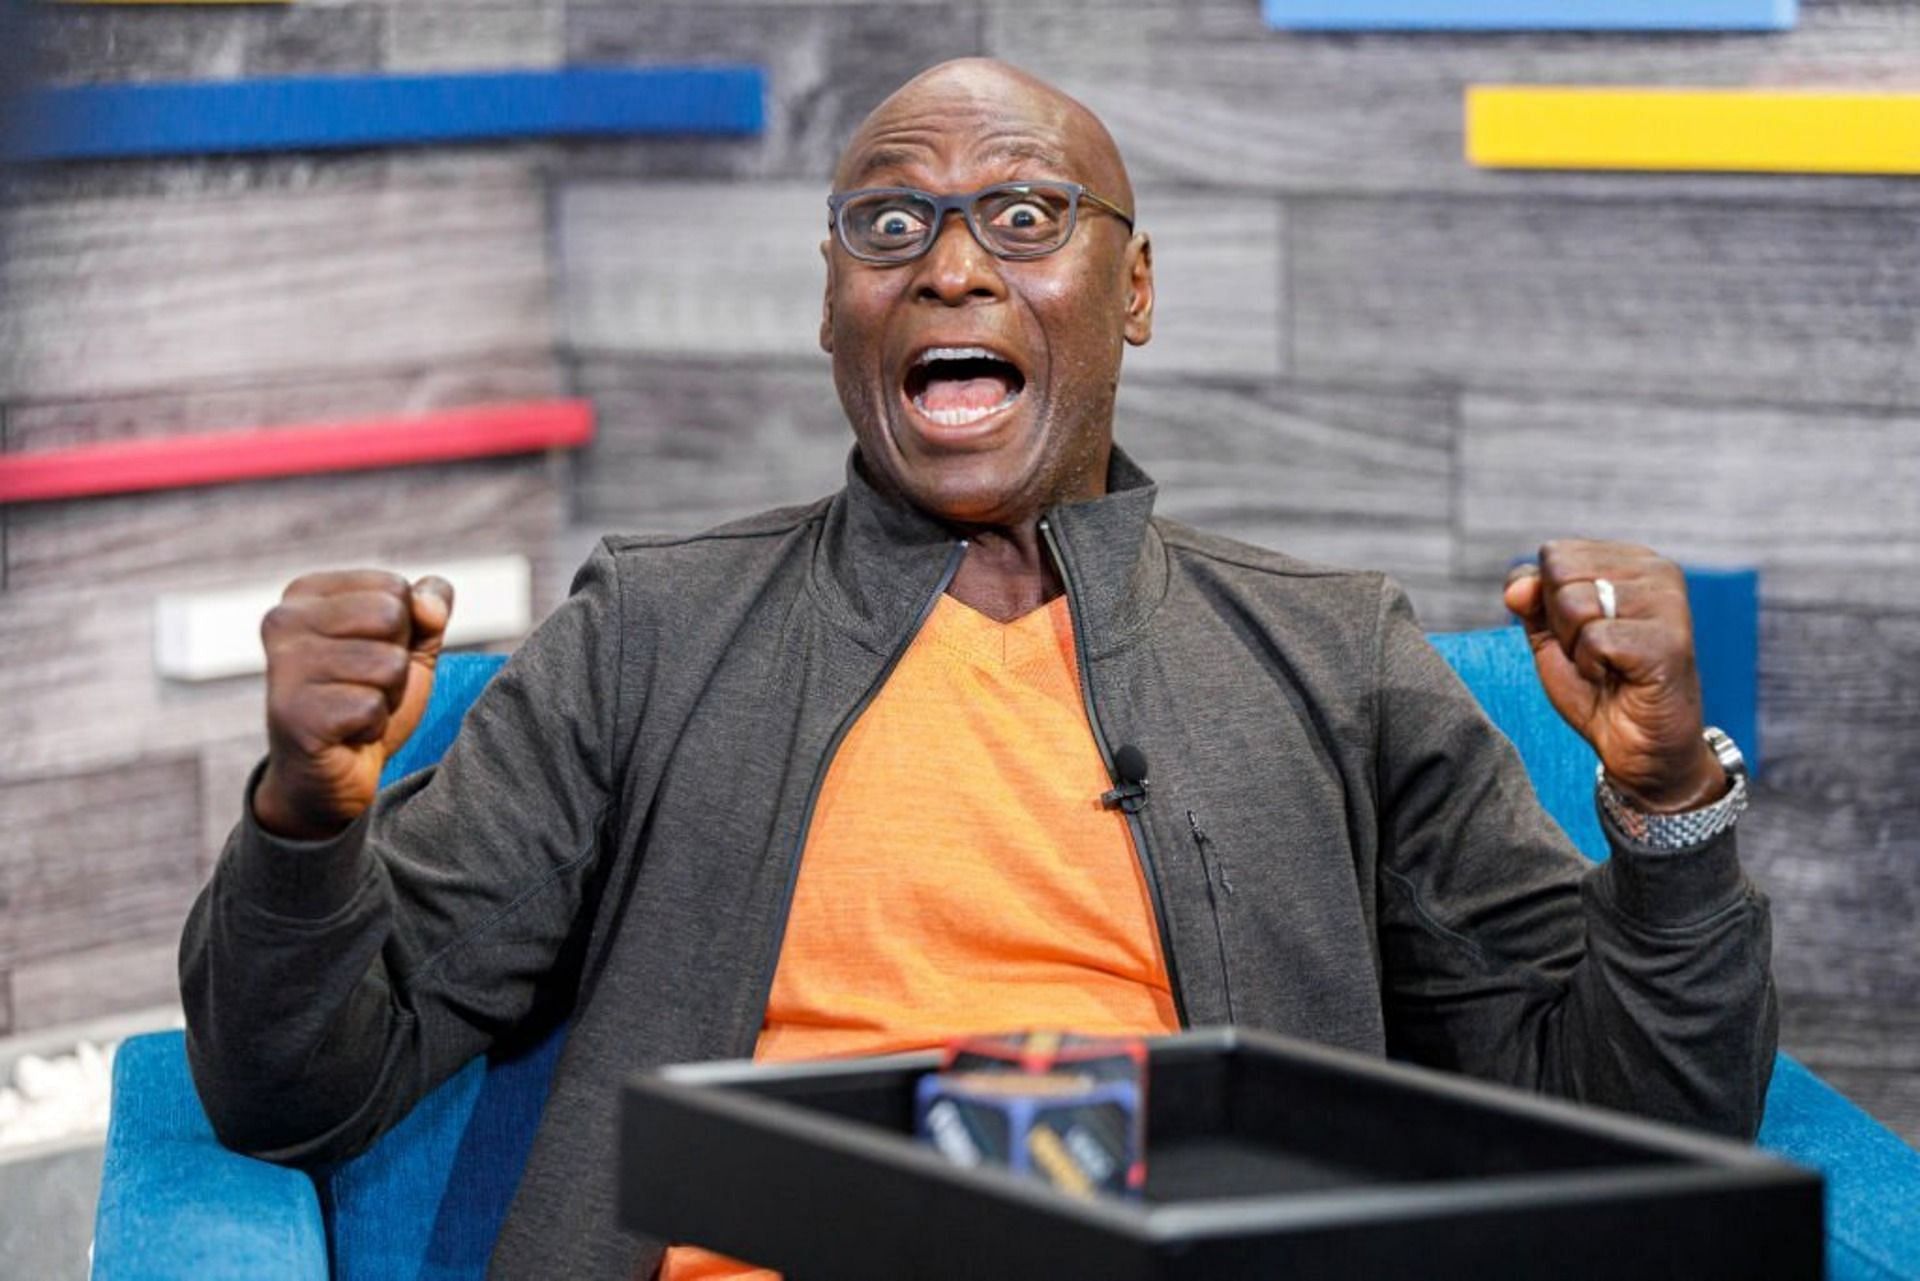 Lance Reddick was 60 years old at the time of death (Image via Rich Polk/Getty Images)